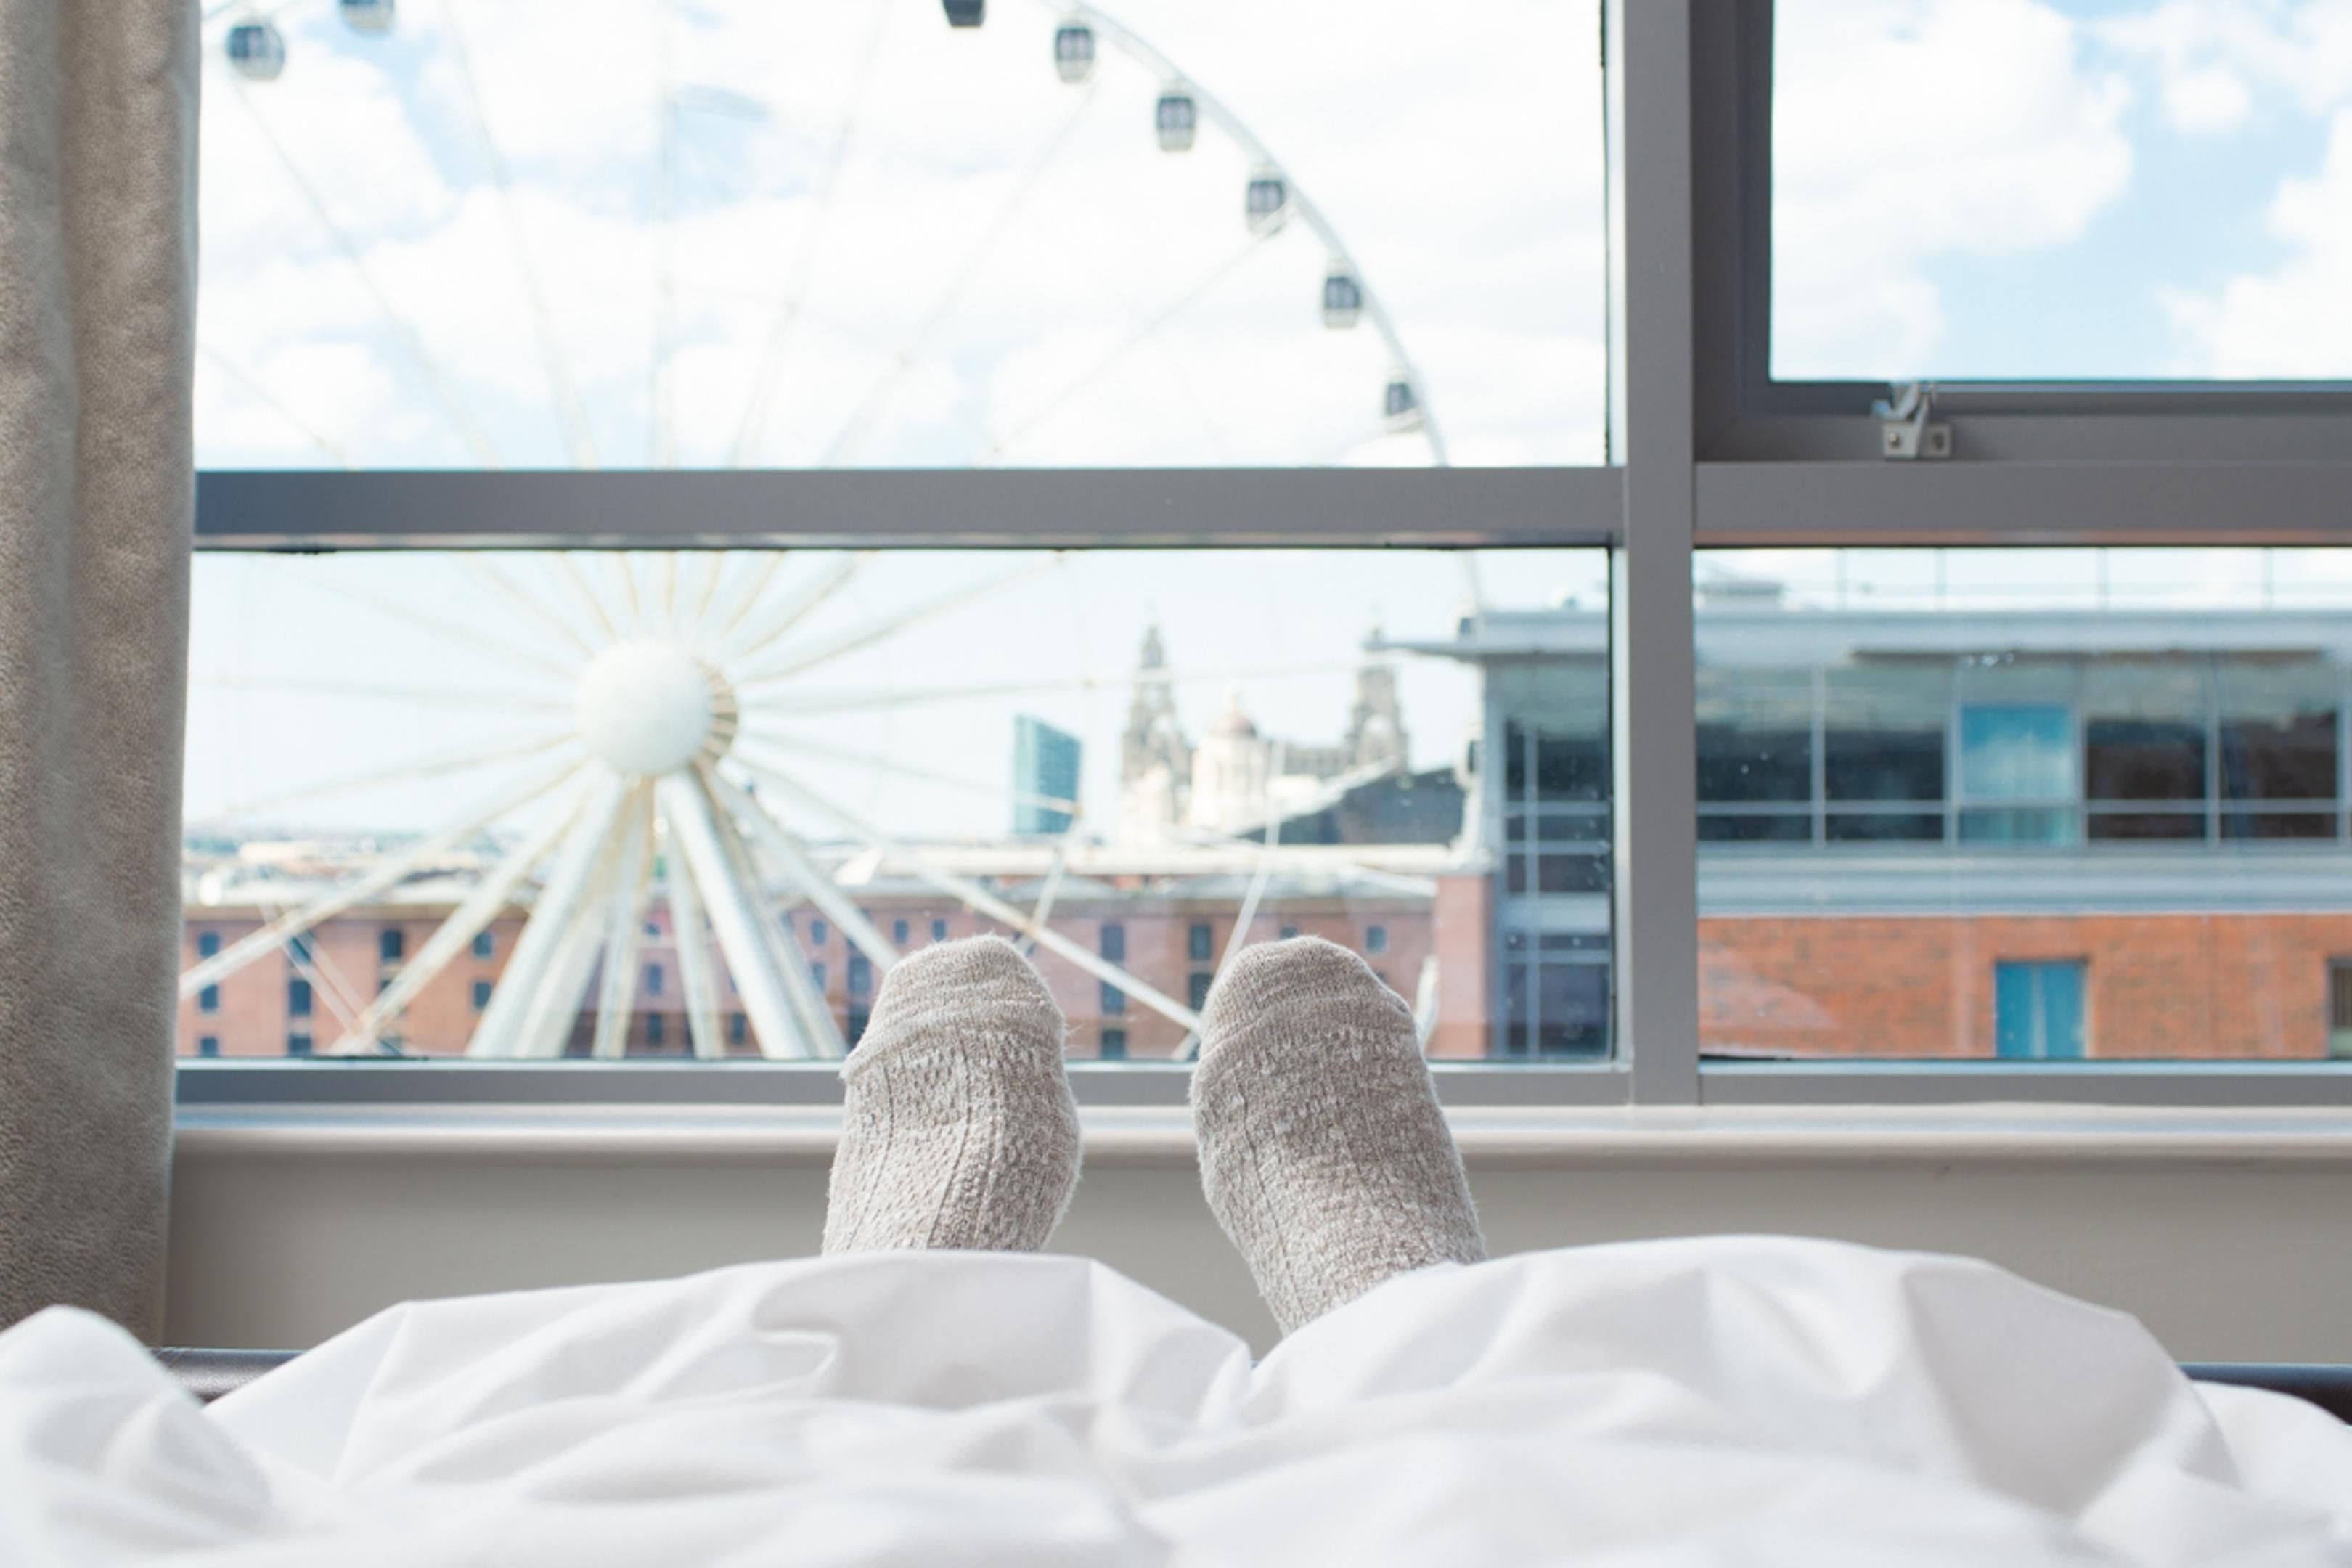 We are located opposite the iconic Liverpool Wheel. Upgrade your room to one with a view of the Royal Albert Dock and enjoy your home away from home in style.